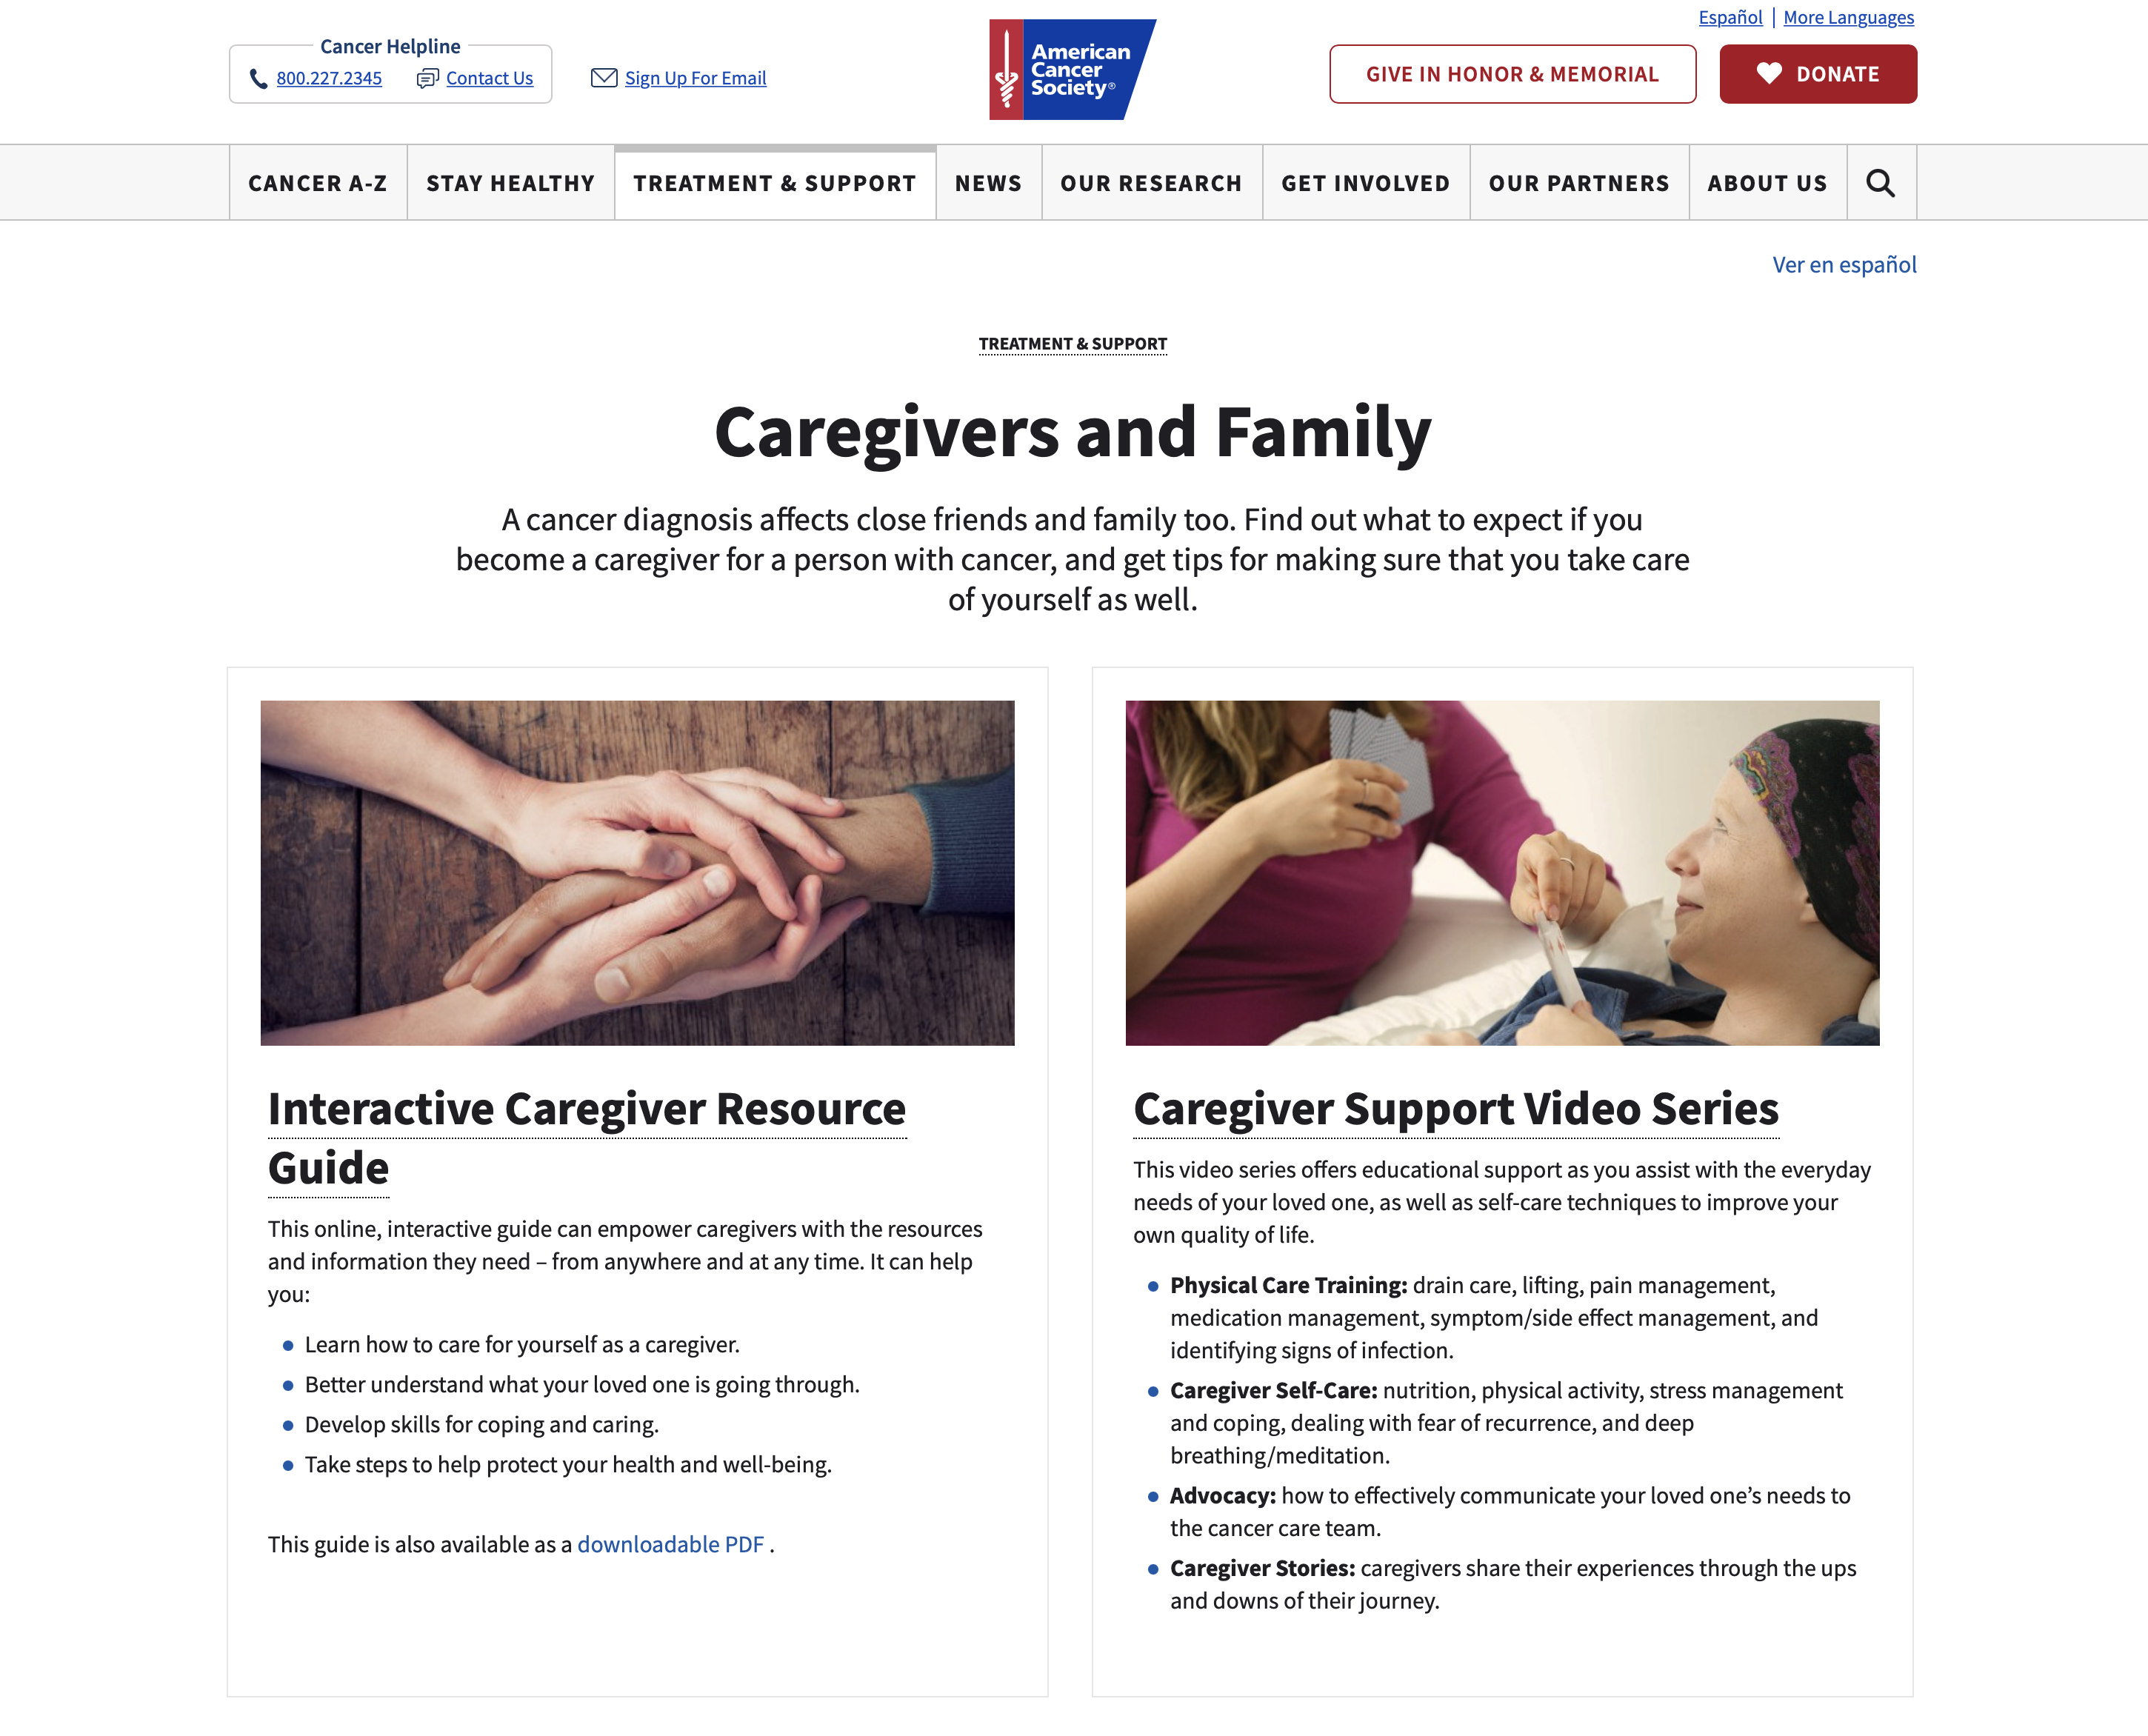 American Cancer Society Caregivers and Family